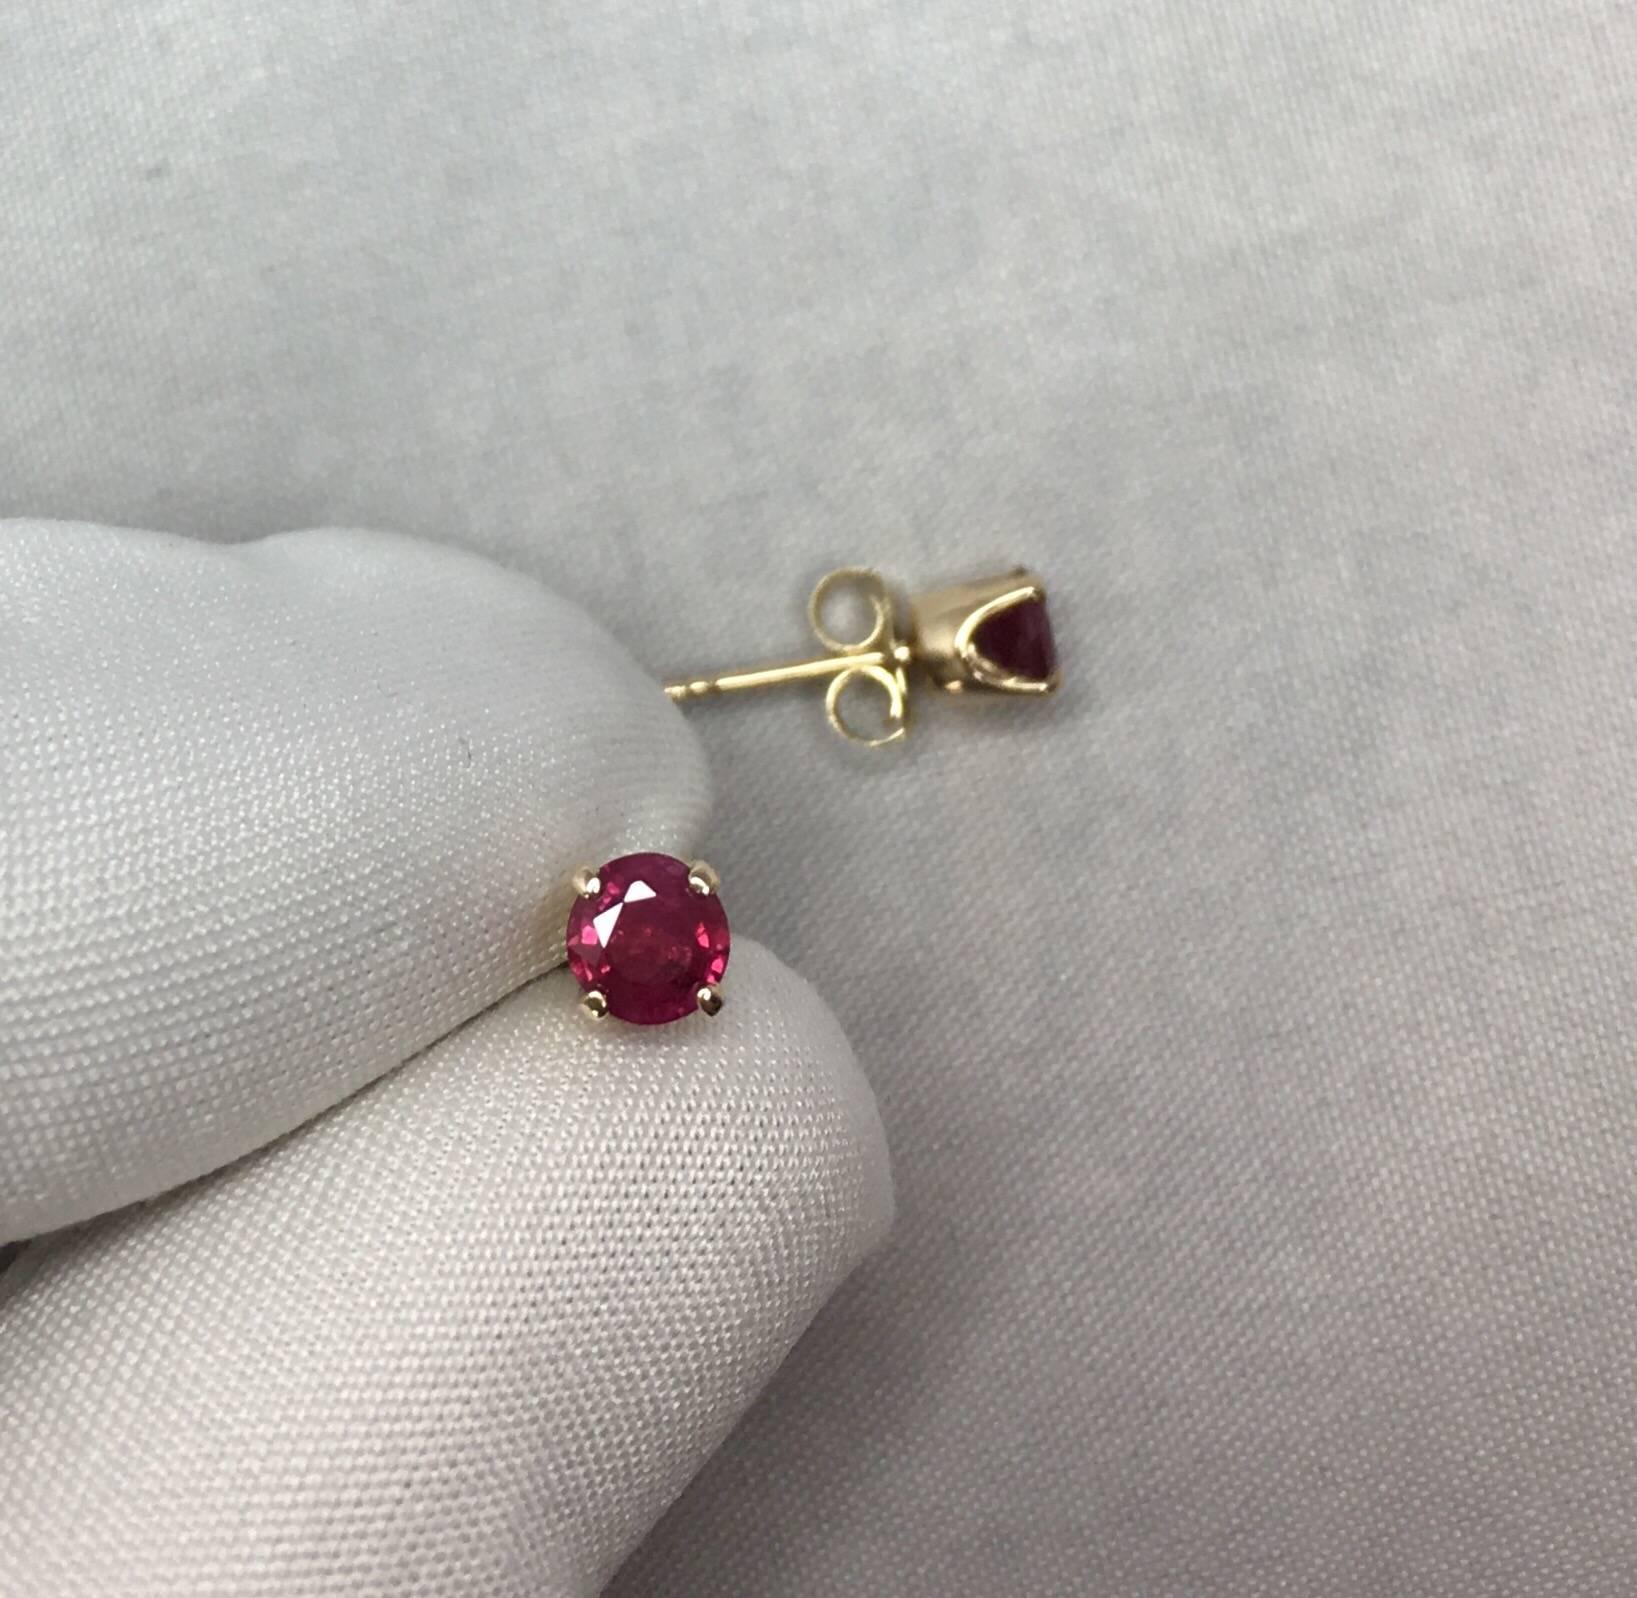 Stunning natural deep red ruby earring studs.

Very rare and fine Ruby pair. 
Deep red colour, both individually certified by IGI Antwerp as natural and Burmese in origin. 

Burmese/Myanmar rubies need no introduction. For centuries they have been